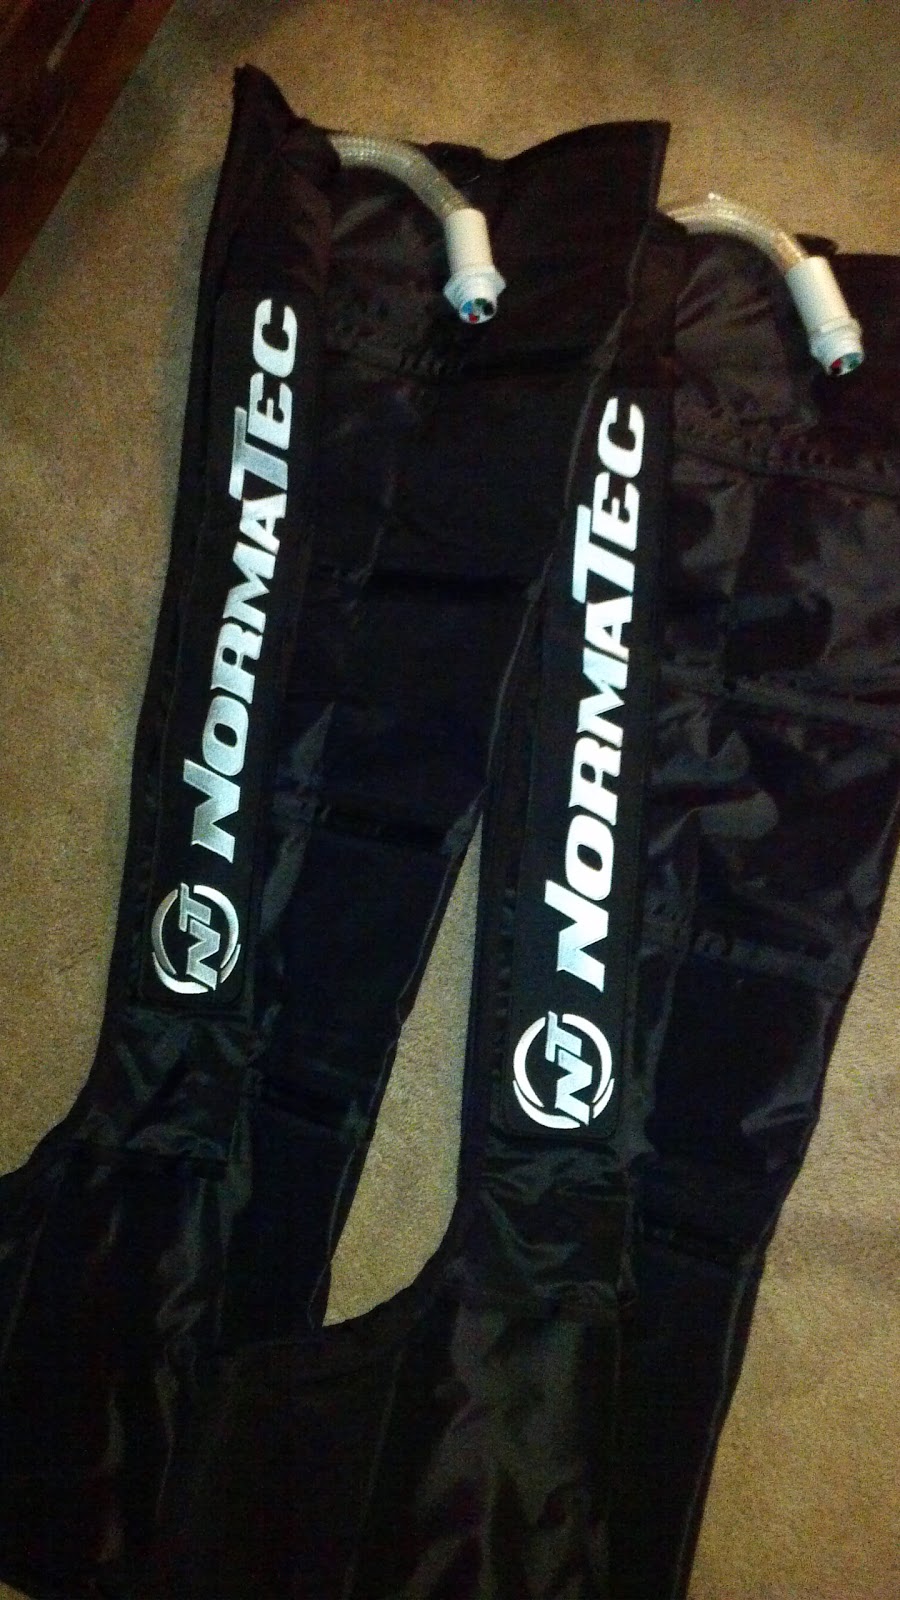 Fuel Your Passion: "Pumped Up" - NormaTec Boots & My Personal Playlist!